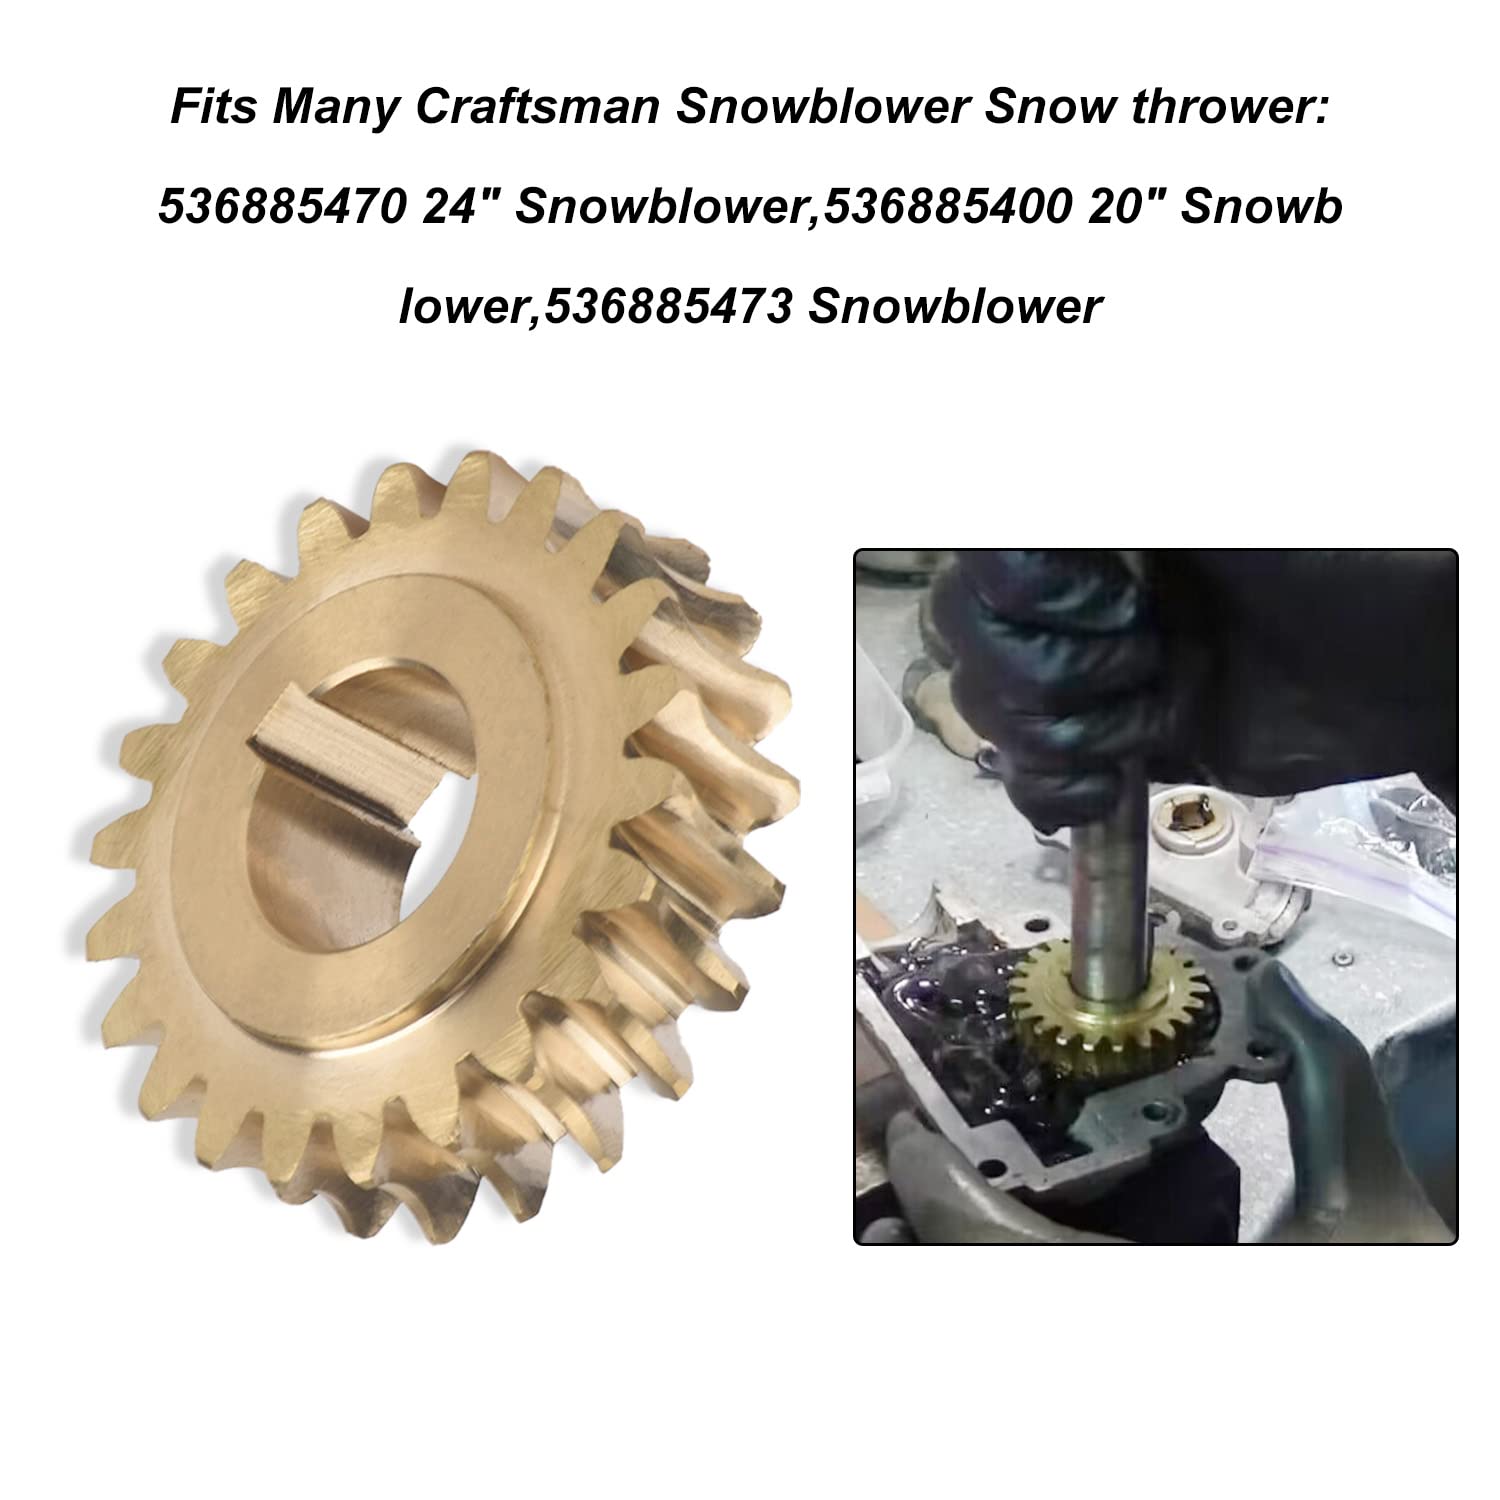 51405MA 51279MA Worm Gear & Gasket Kit Compatible With Craftsman SnowThrower for 2 Dual Stage Snowblower 536886540 536886180 601002109, Replaces MT51405MA, 51405, 9355, 204167 Models (22 Teeth)